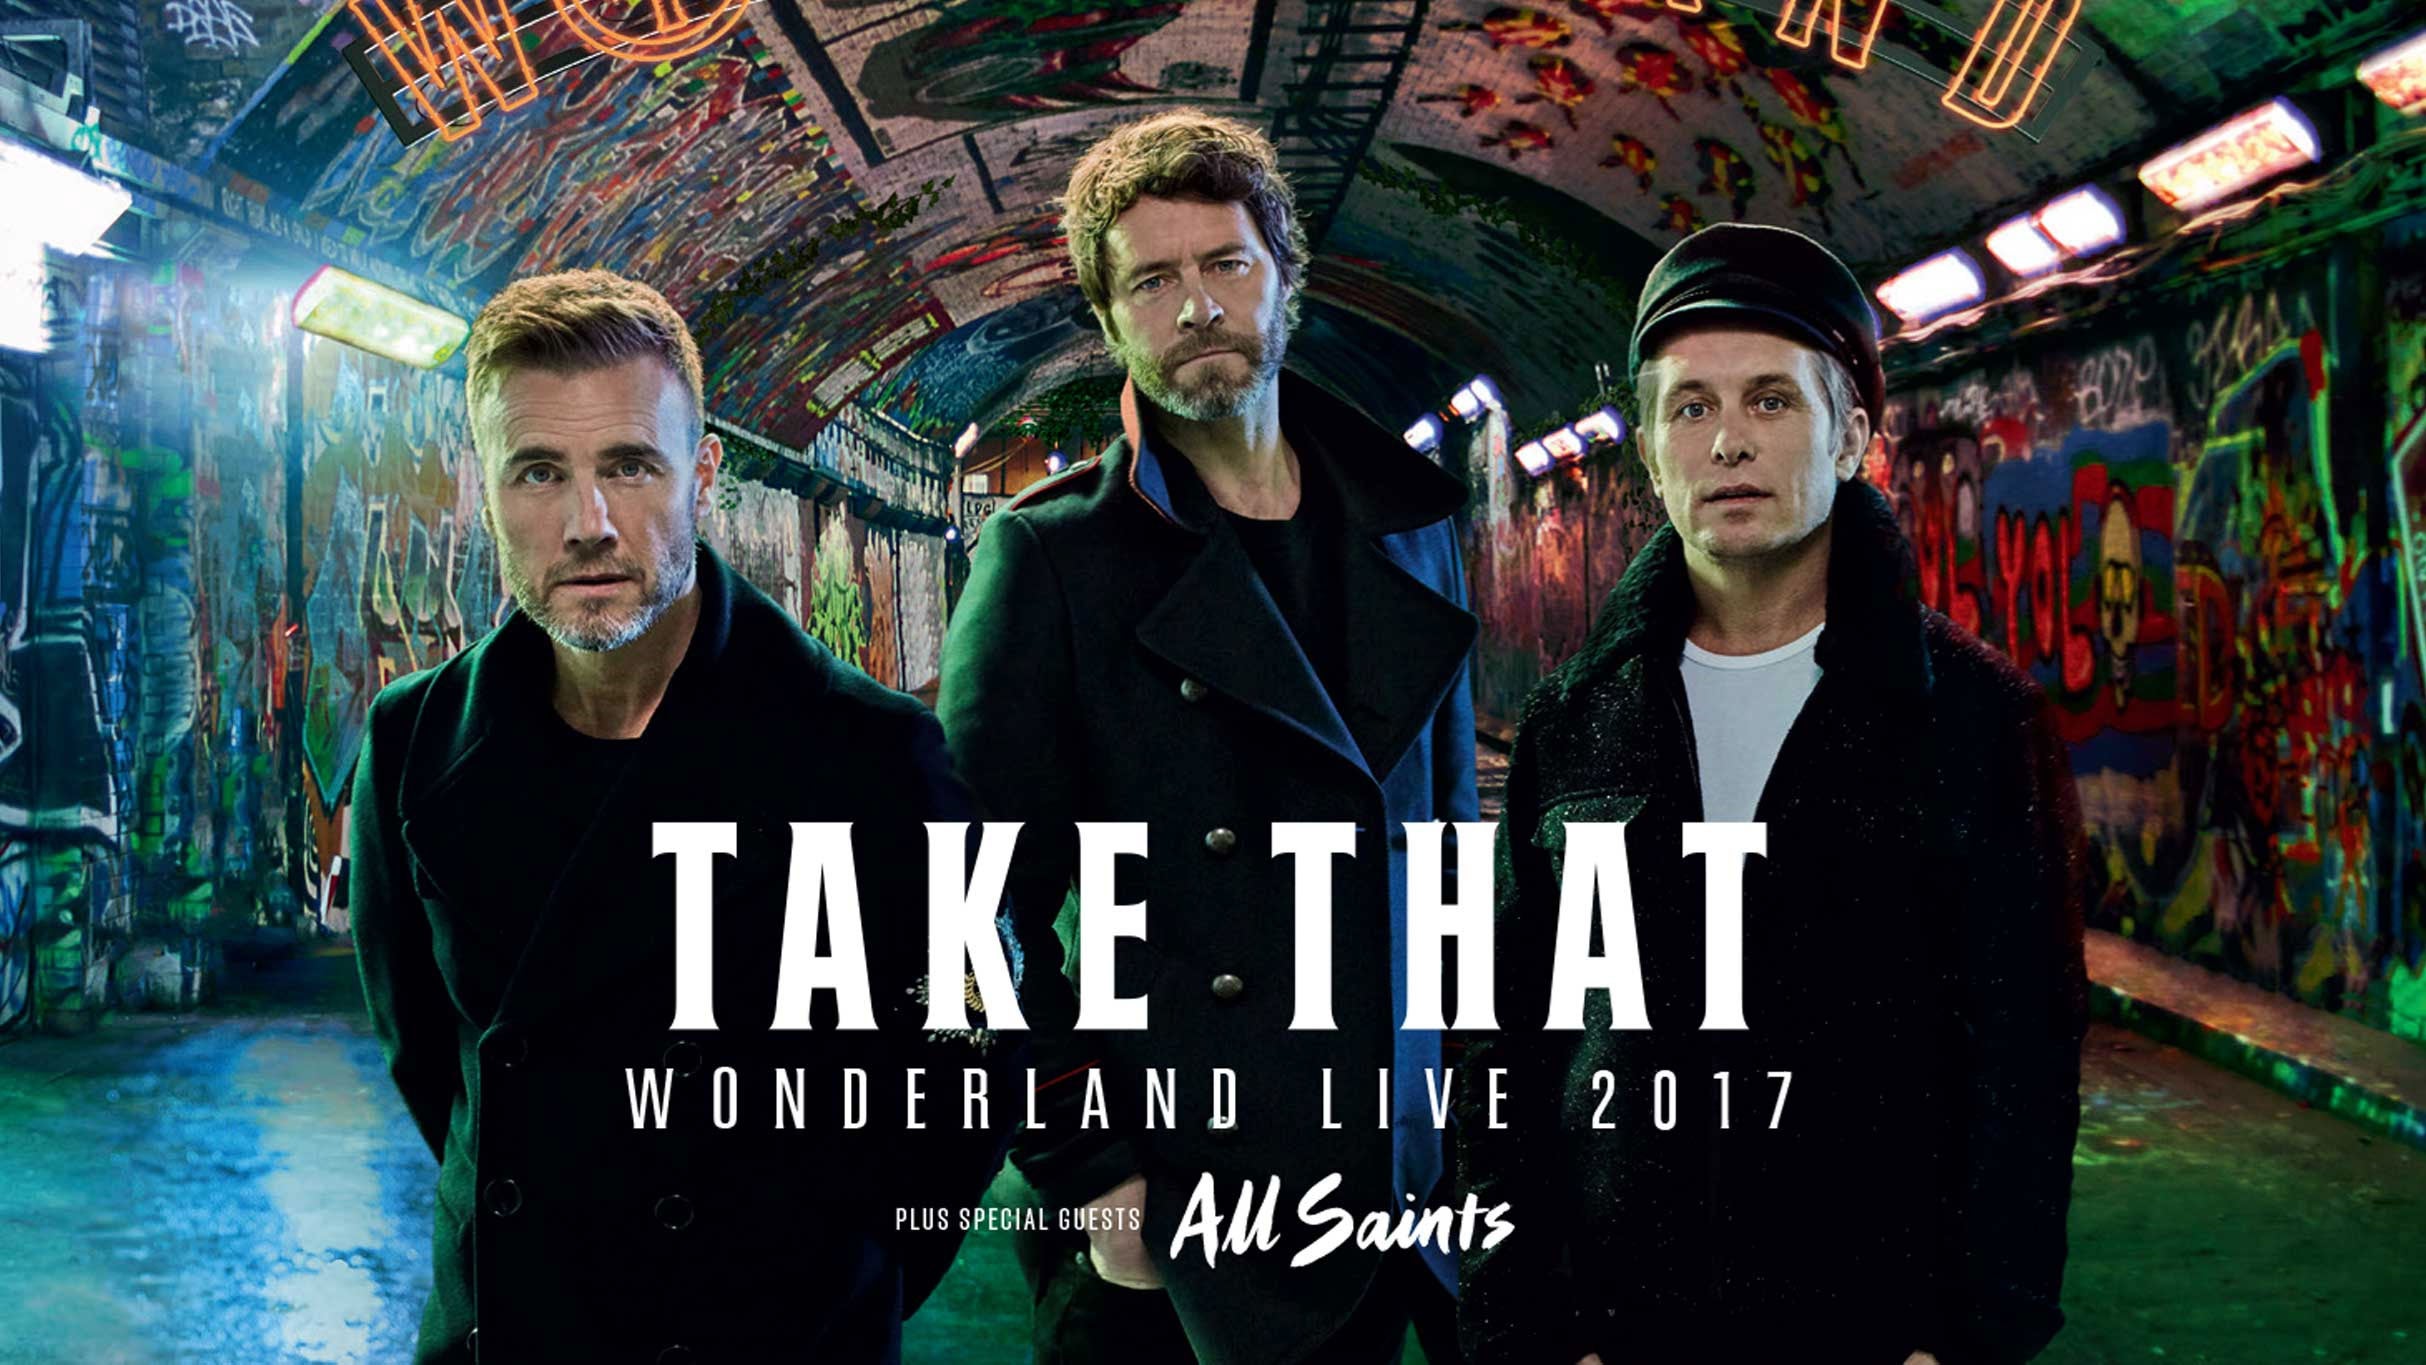 Take That: This Life On Tour - Premium Package - The Gallery